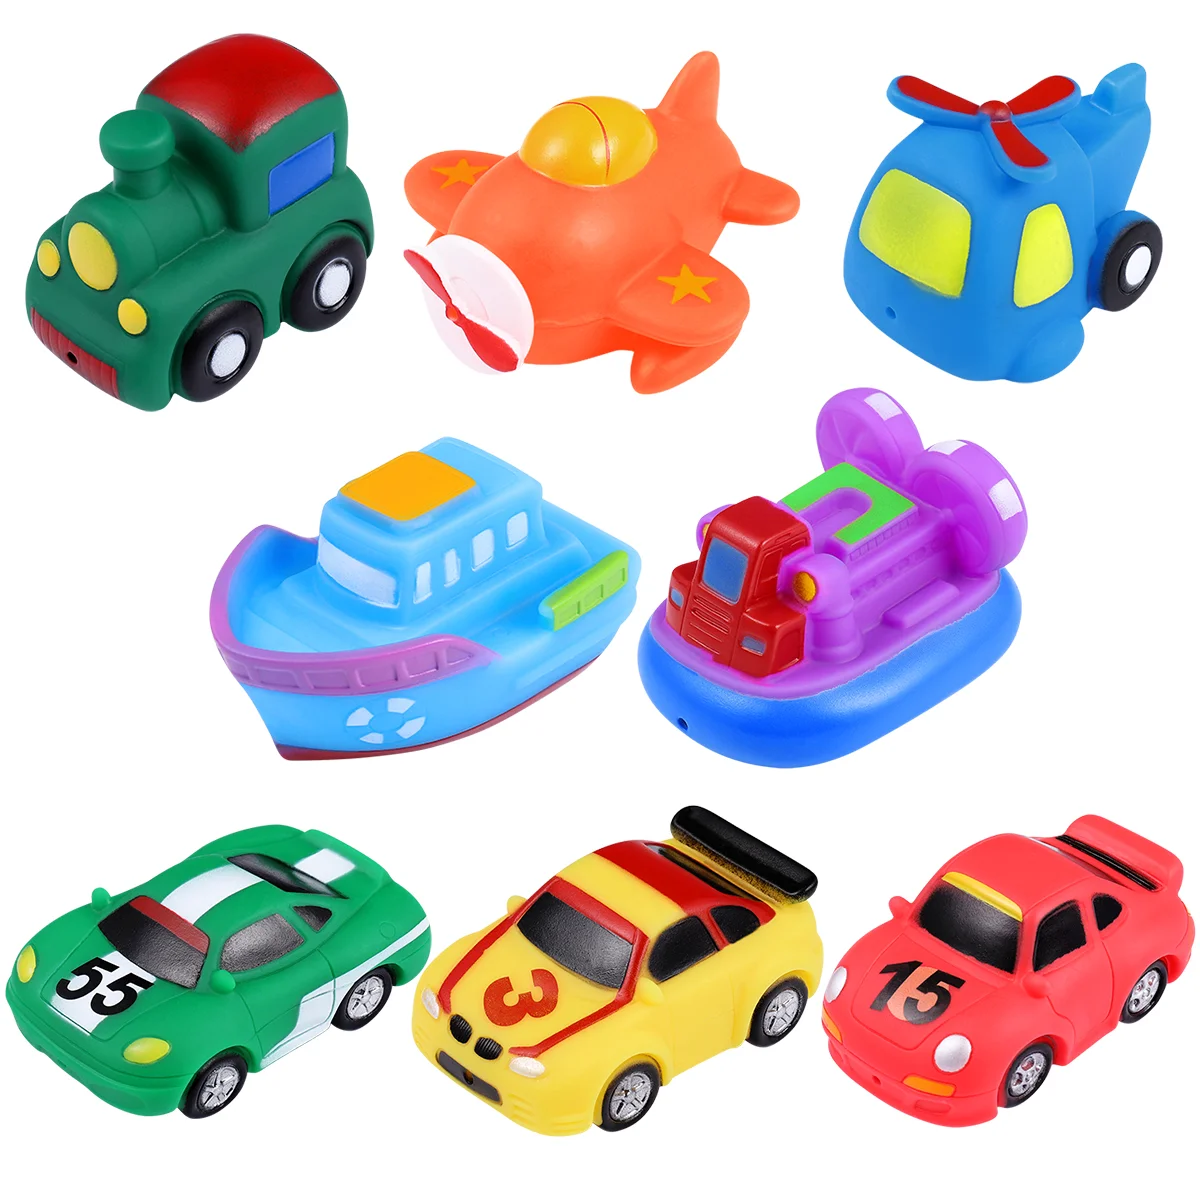 

TOYMYTOY 8PCS Boat Vehicle Aircraft Bath Toys Squeeze Sound Bathtime Bath Squirt Toys for Baby or Kids